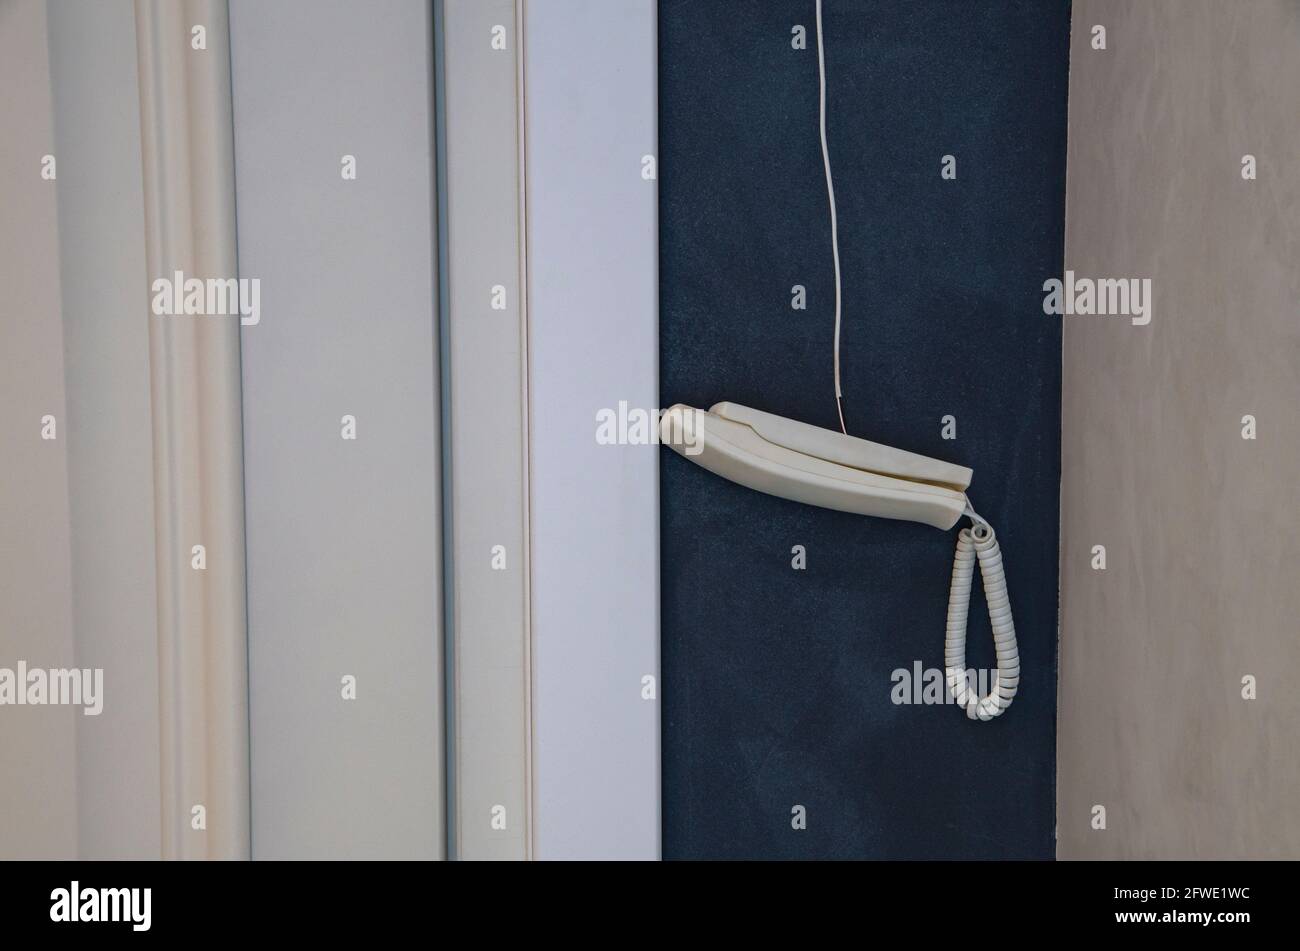 Vintage telephone receiver hanging on a wire on a light background with copy space. Stock Photo